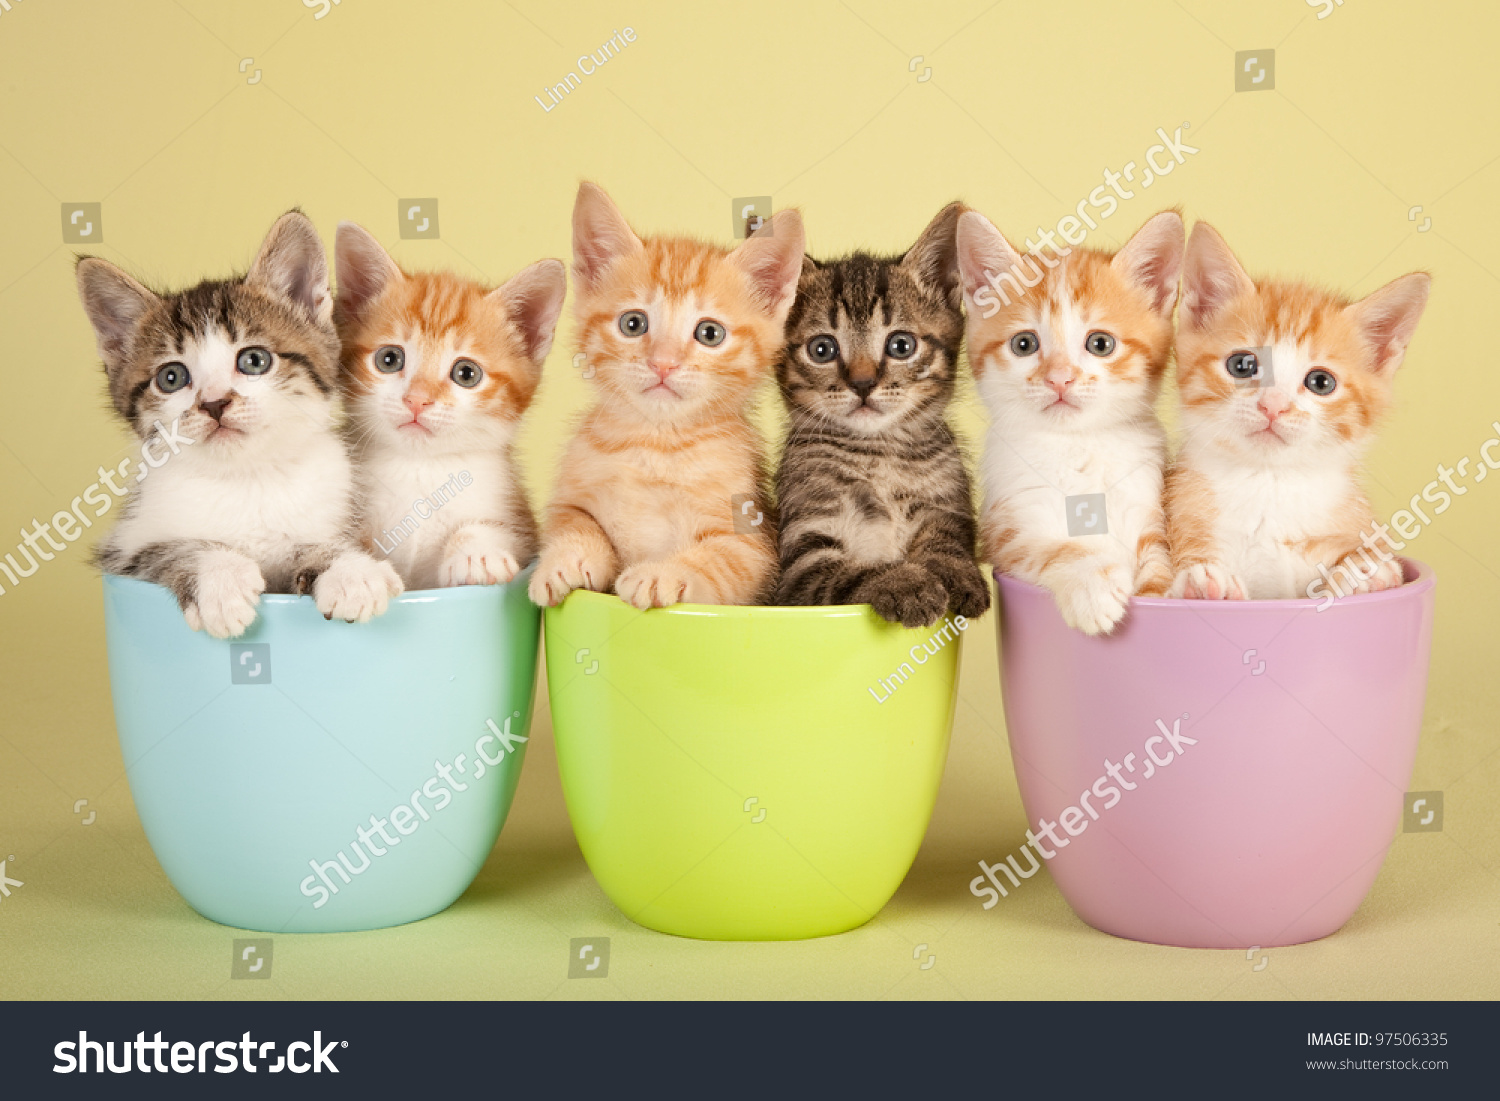 Six cute kittens sitting inside in pastel containers #97506335